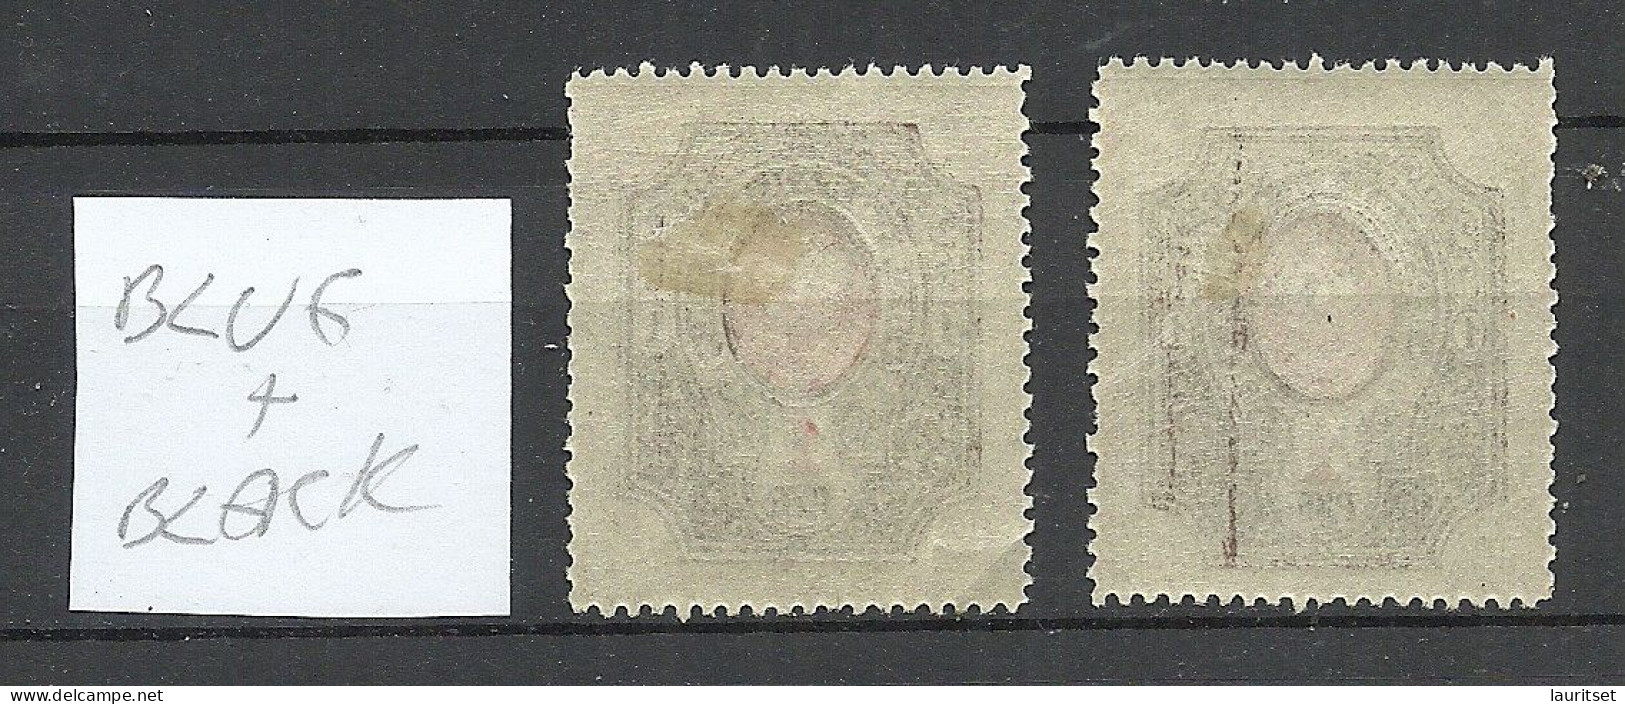 Russia RUSSLAND 1920 Civil War Wrangel Army Camp Post At Gallipoli 10 000 On 1 R. Perforated Black + Blue OPT * - Wrangel Leger